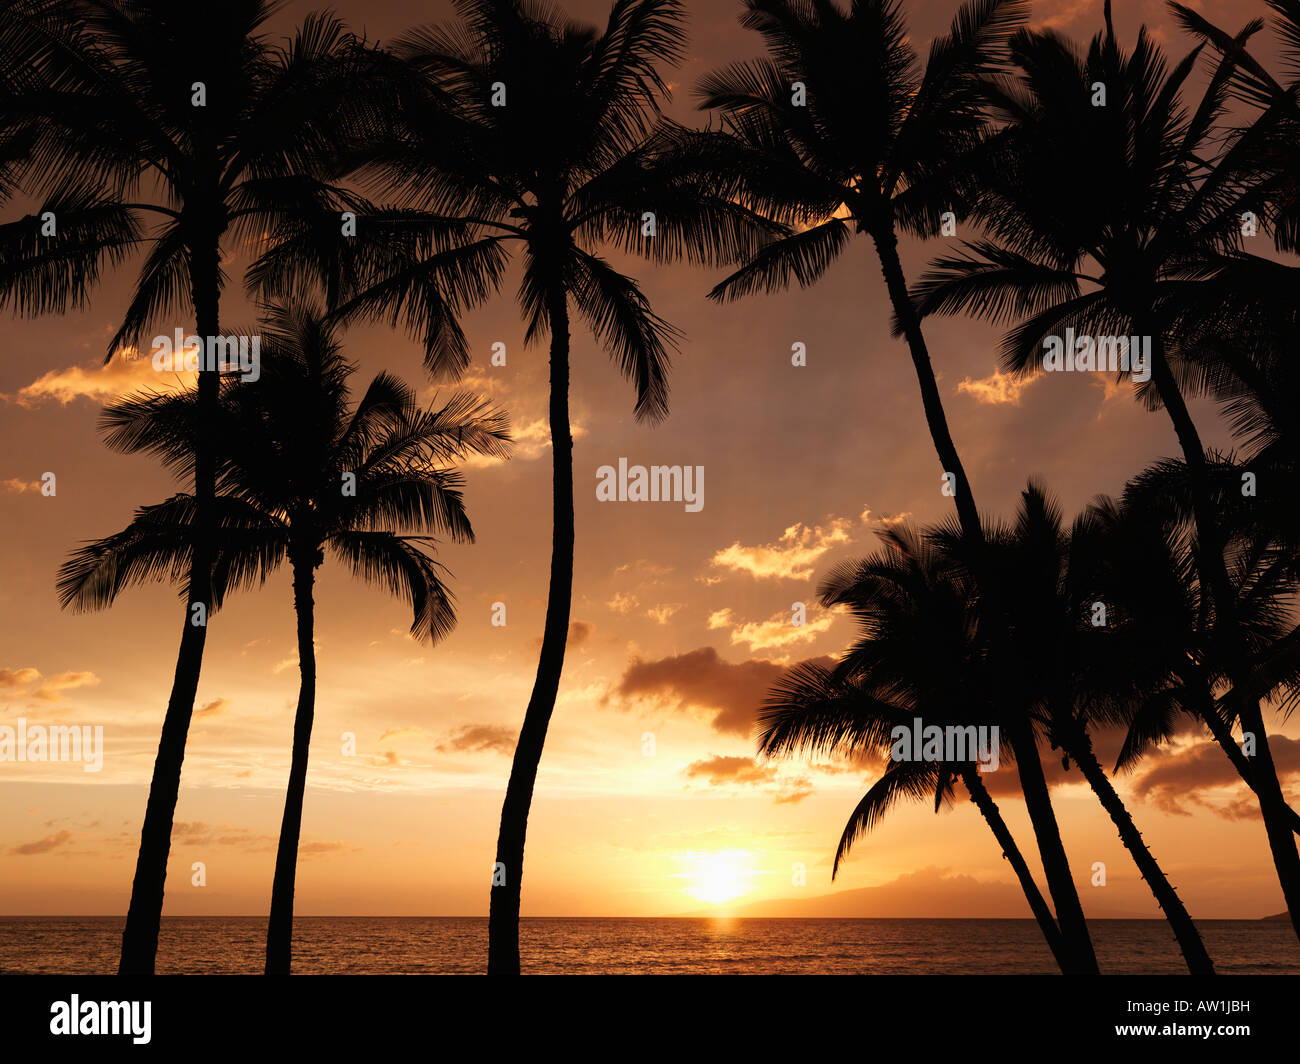 Maui Hawaii sunset framed by silhouetted palm trees Stock Photo